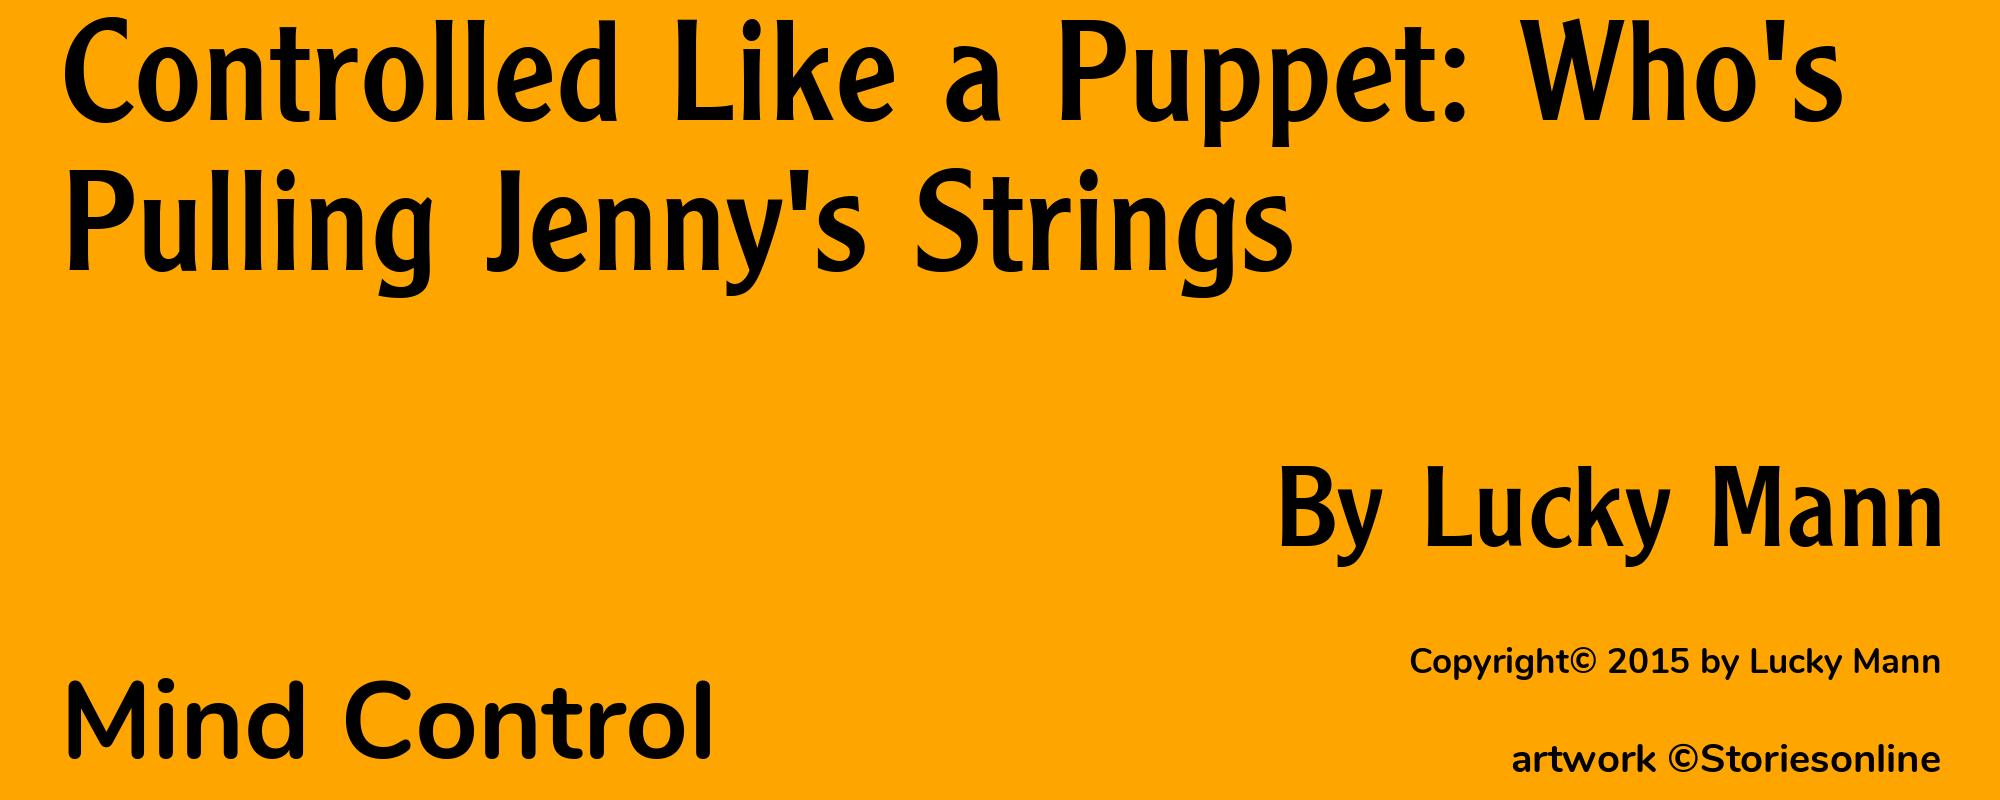 Controlled Like a Puppet: Who's Pulling Jenny's Strings - Cover